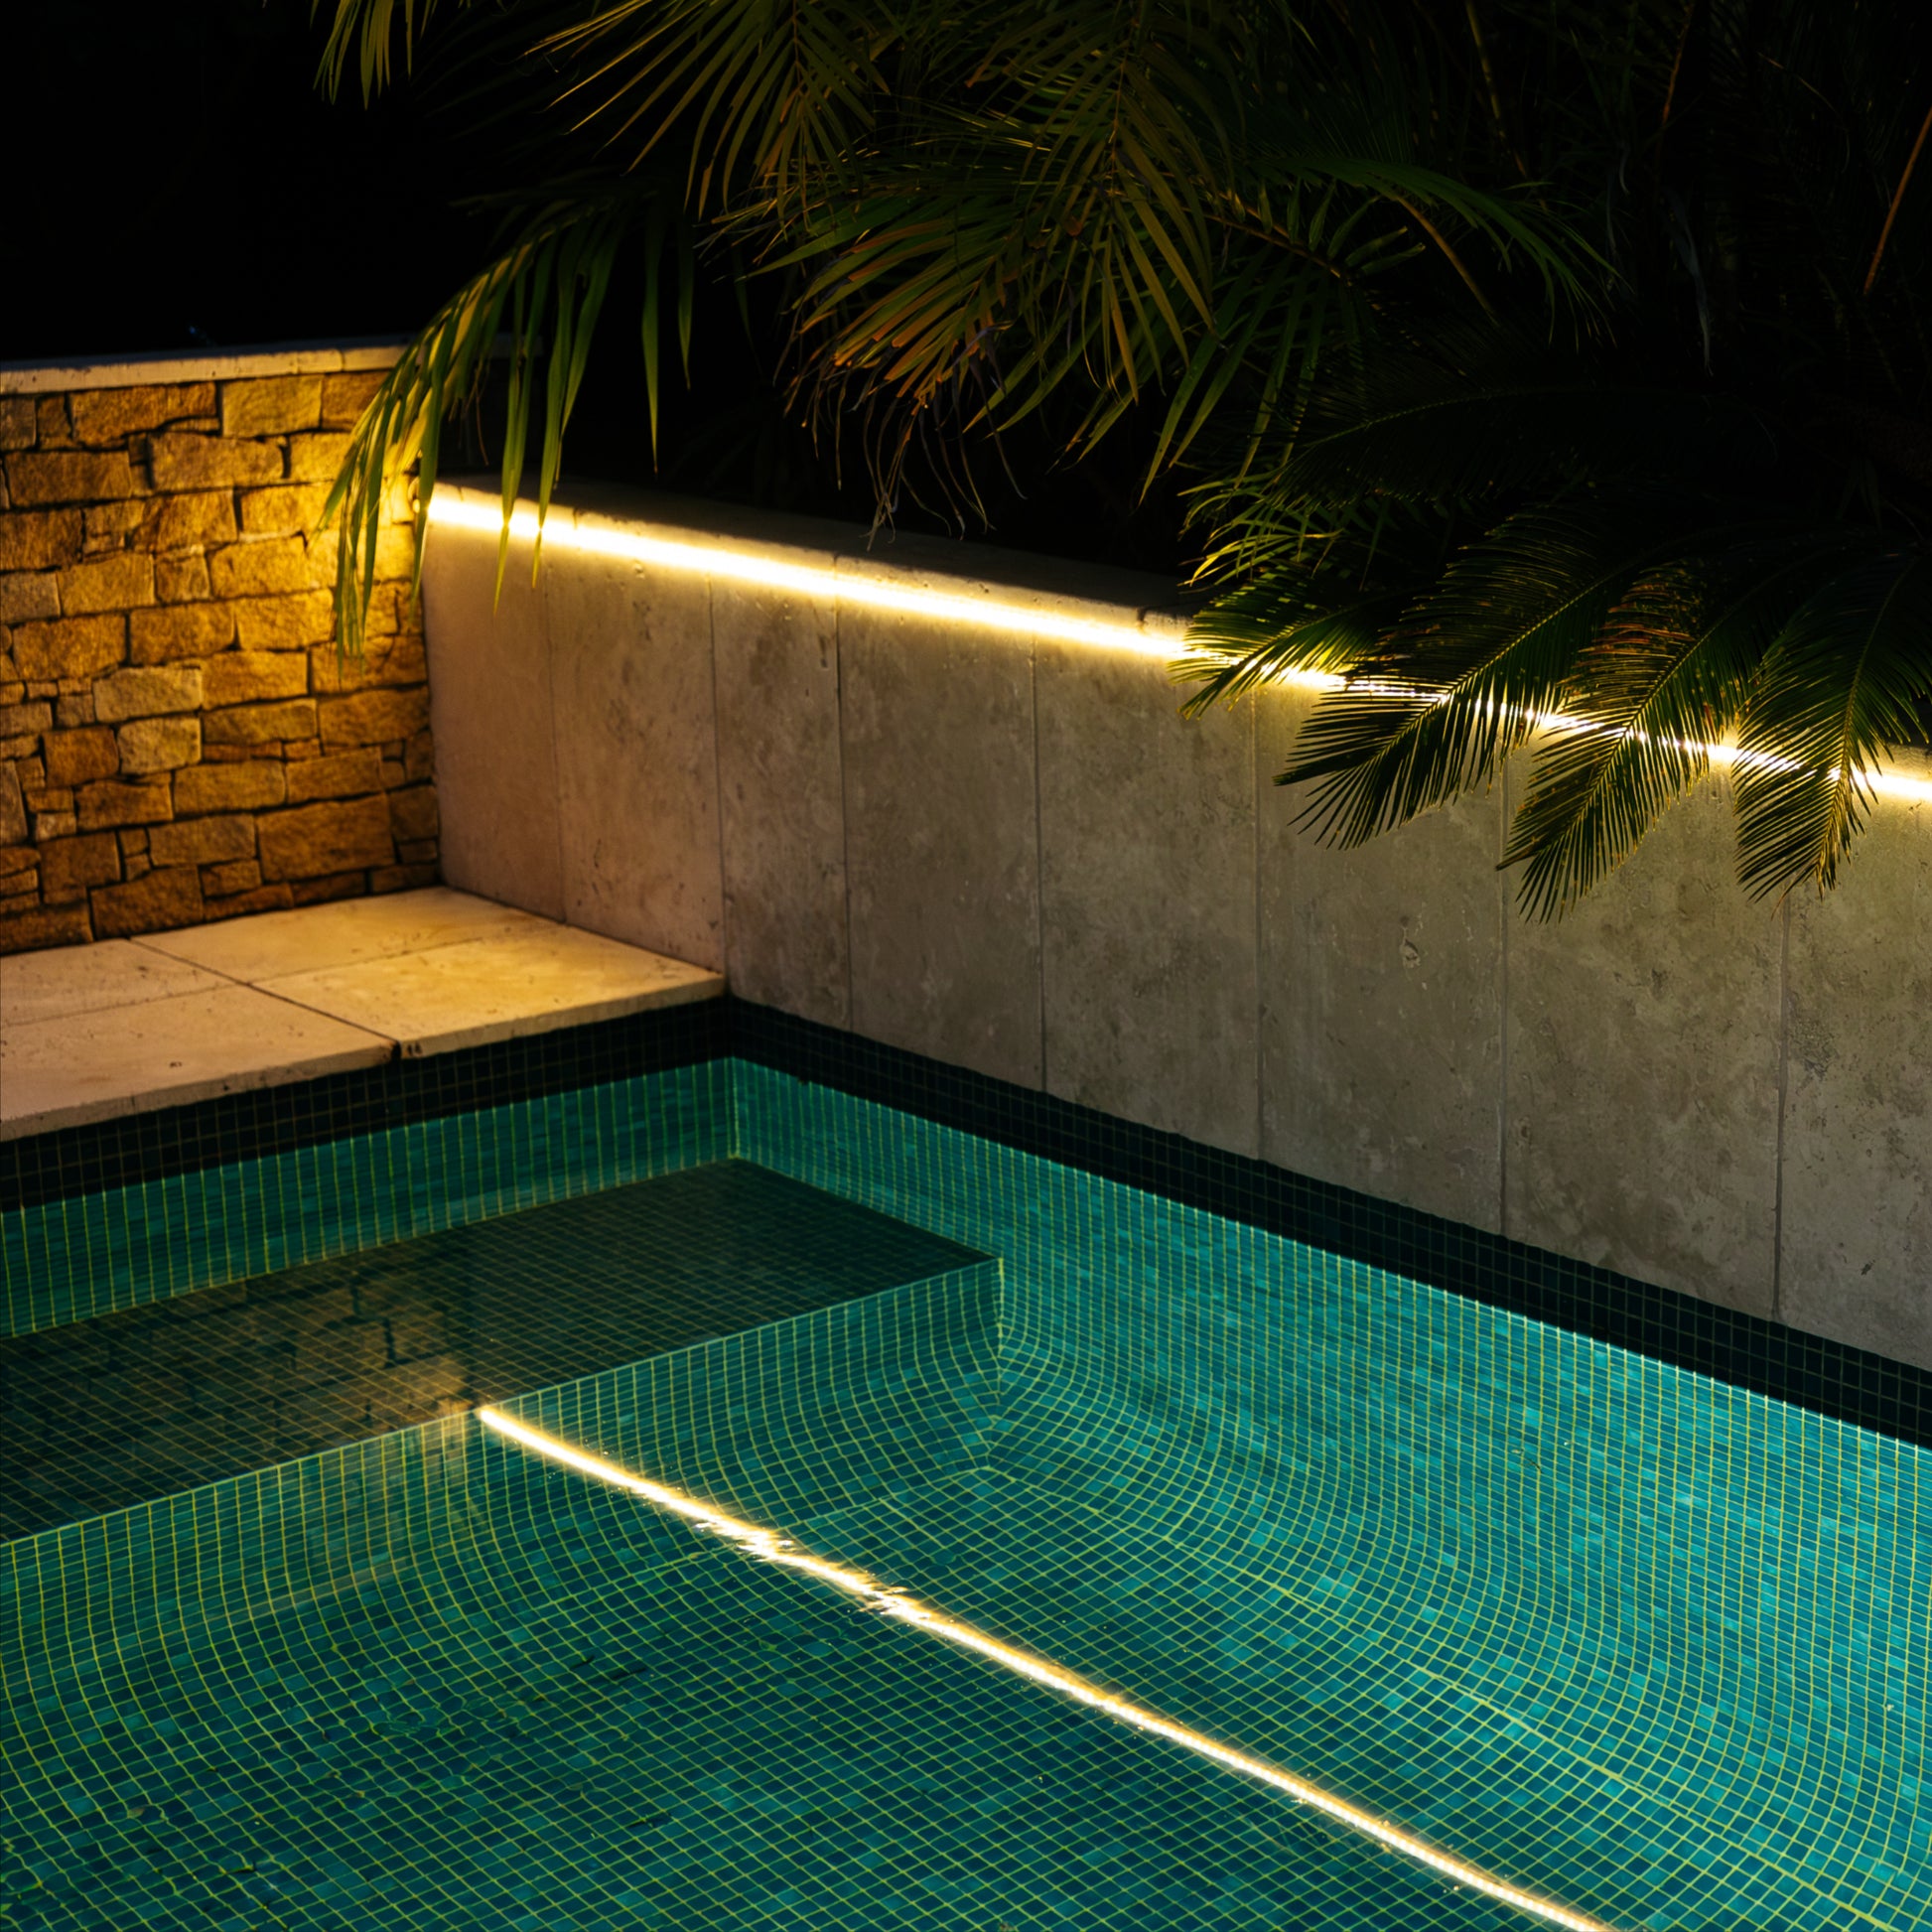 Solar LED Strip Lights mounted over and reflecting into a pool